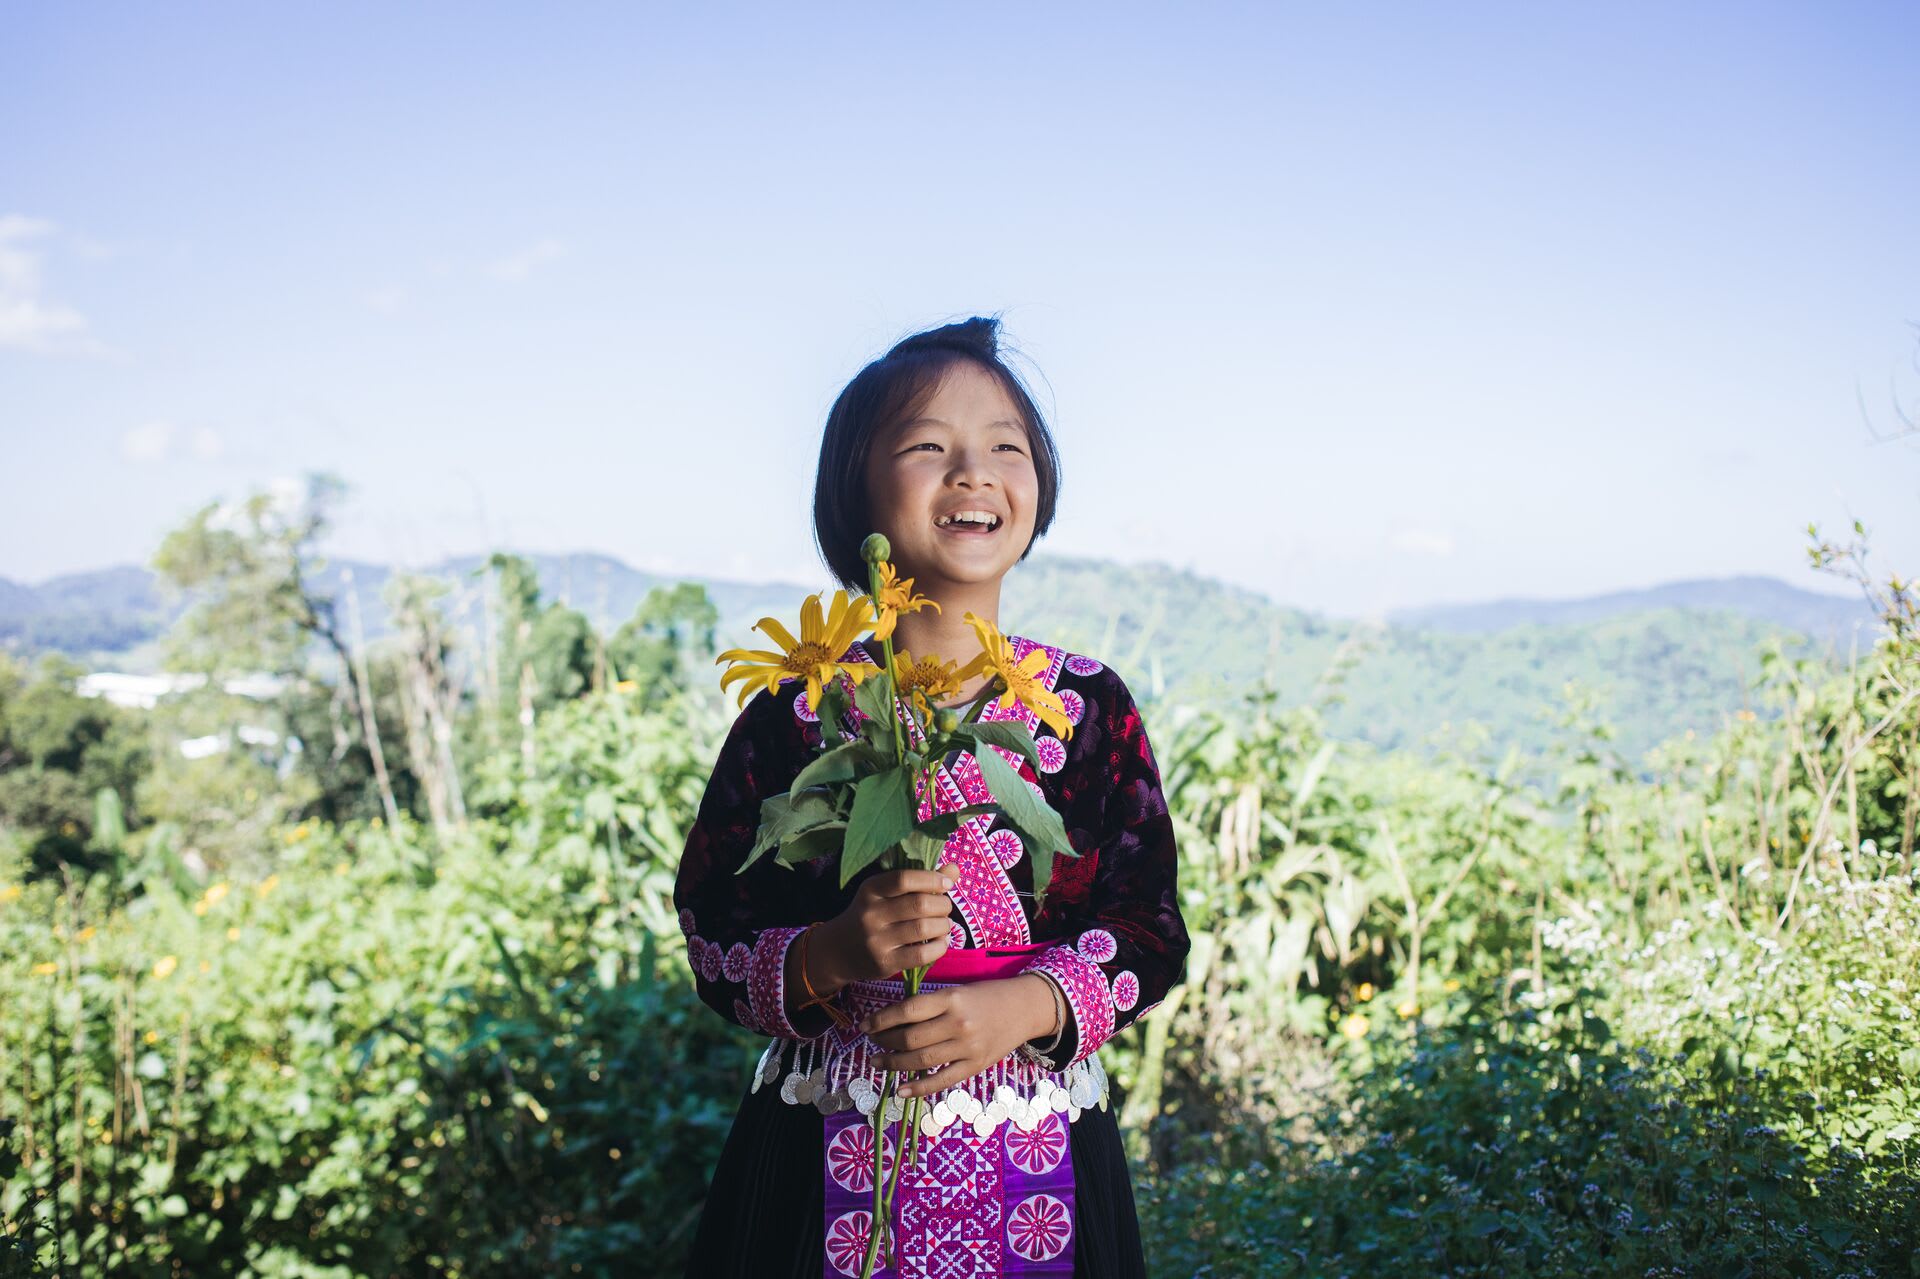 Girl smiles in a field and holds a bouquet of flowers.